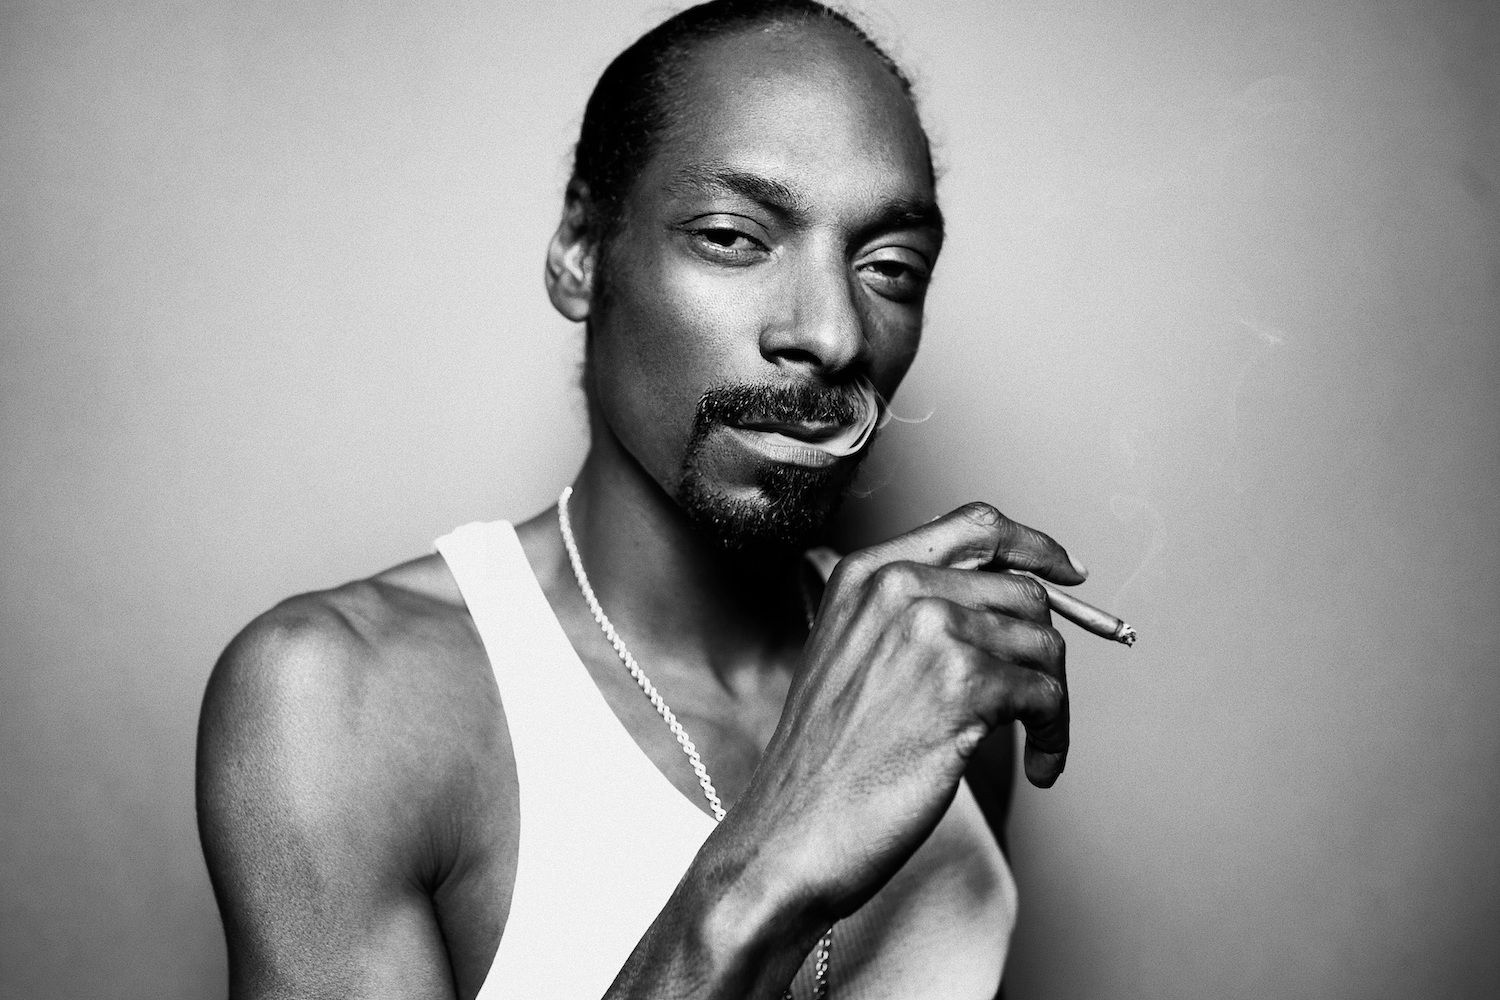 Pictures of Snoop Dogg